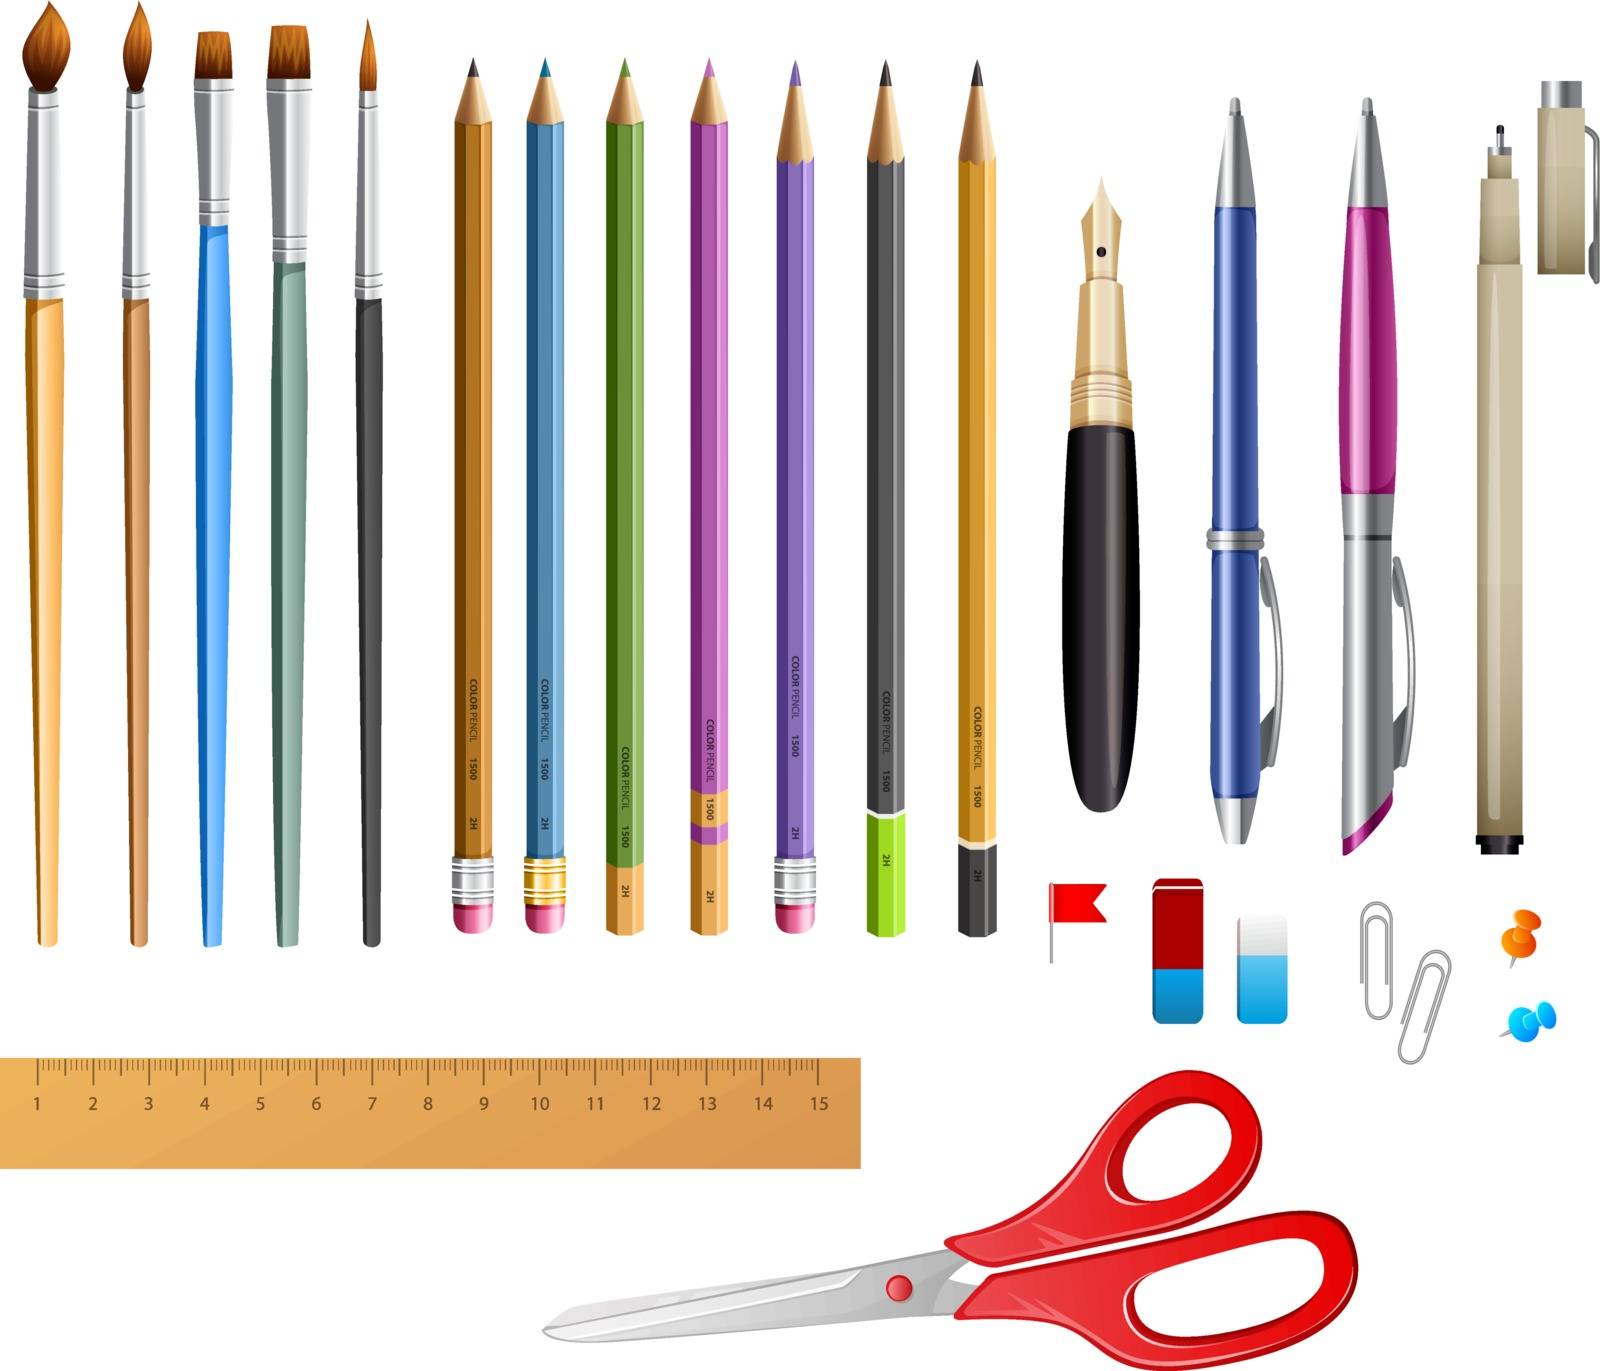 Vector illustration of Set include pens ana pencils